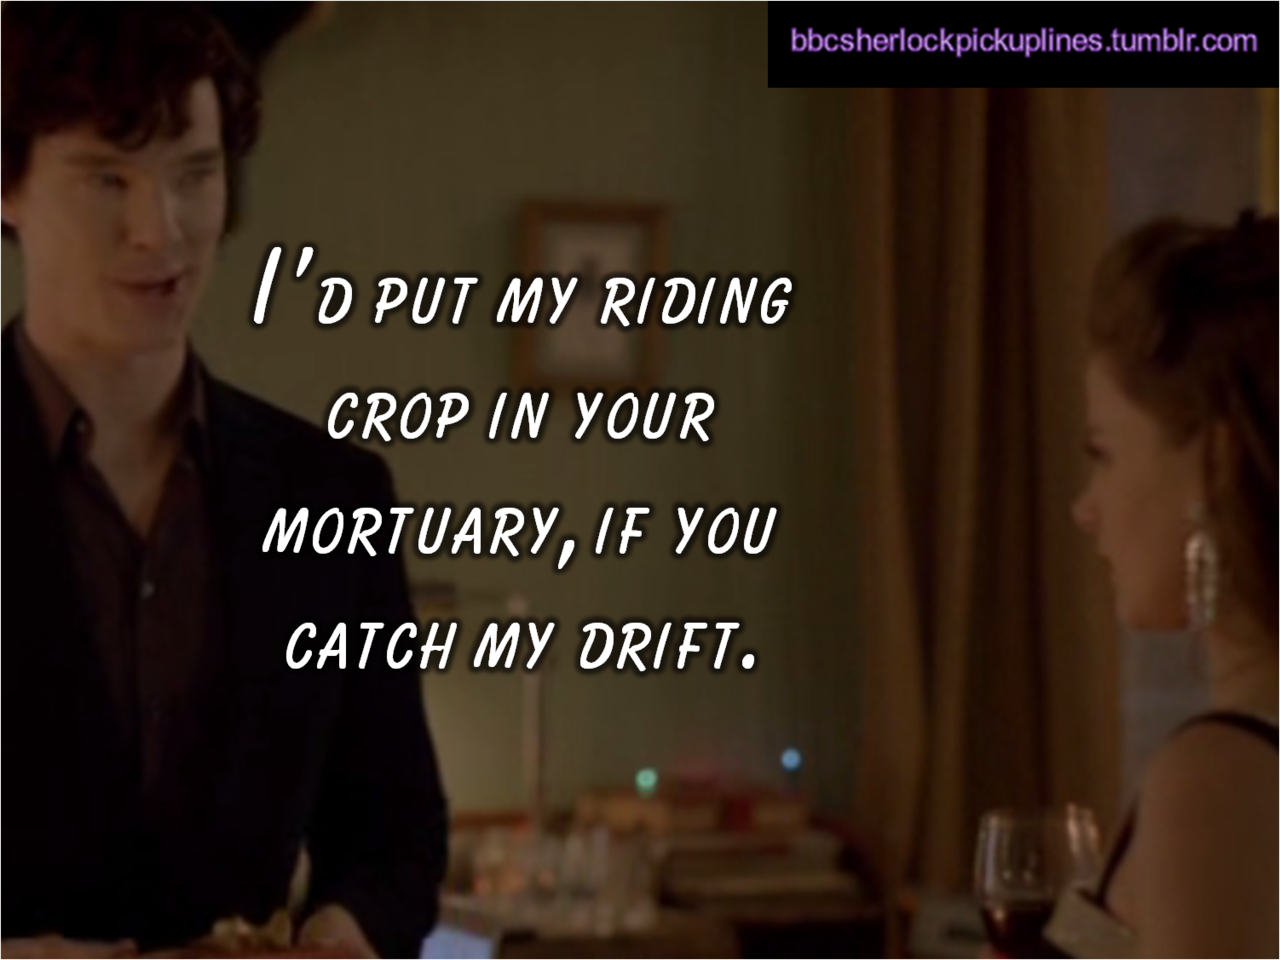 &ldquo;I&rsquo;d put my riding crop in your mortuary, if you catch my drift.&rdquo;